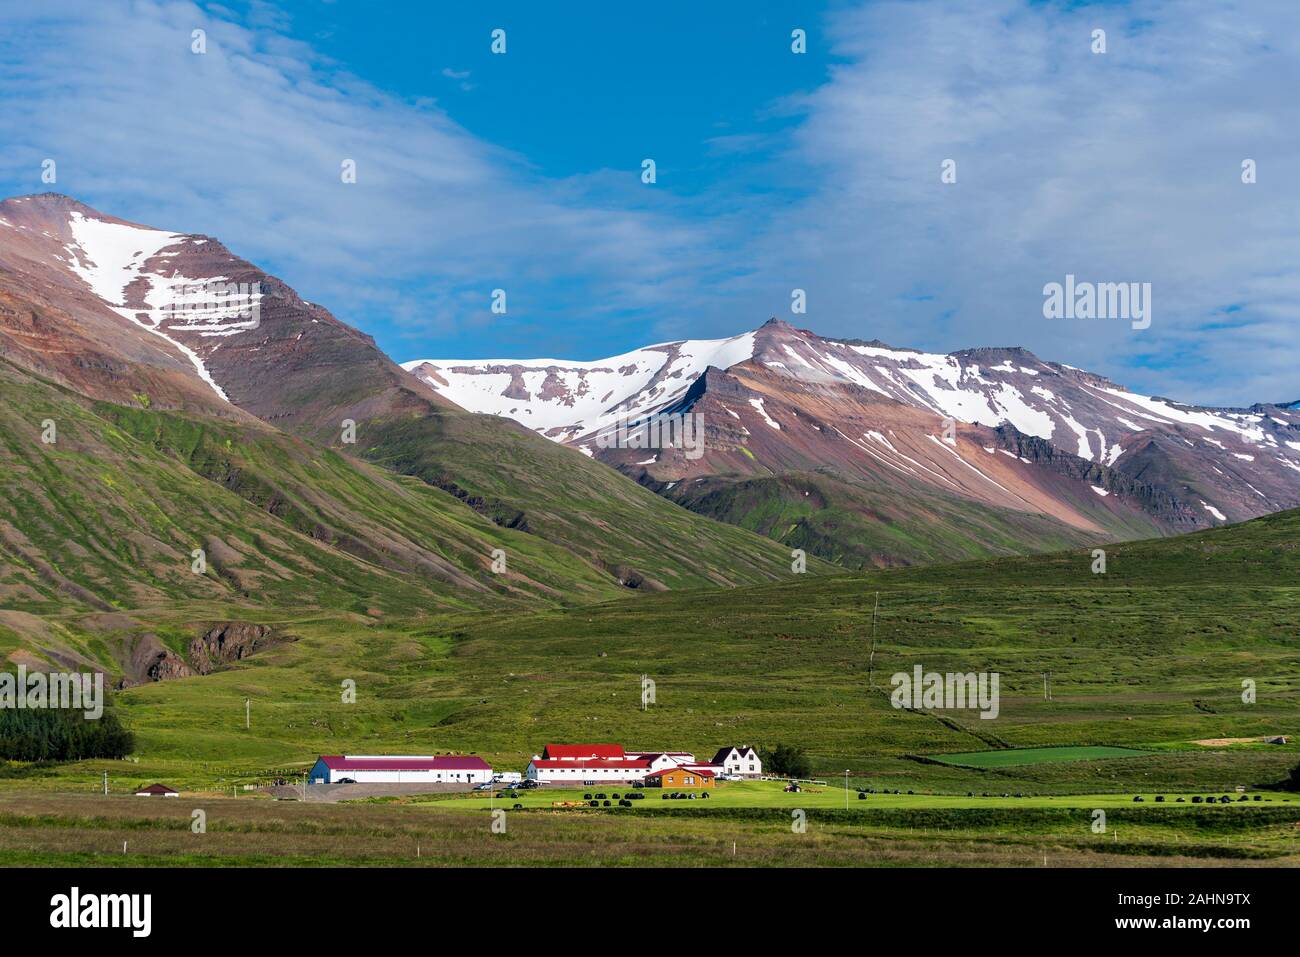 Typical Icelandic farm in the green valley underneath snowy mountains in Northern of Iceland. Horgarsveit municipality of North-central Iceland. Stock Photo